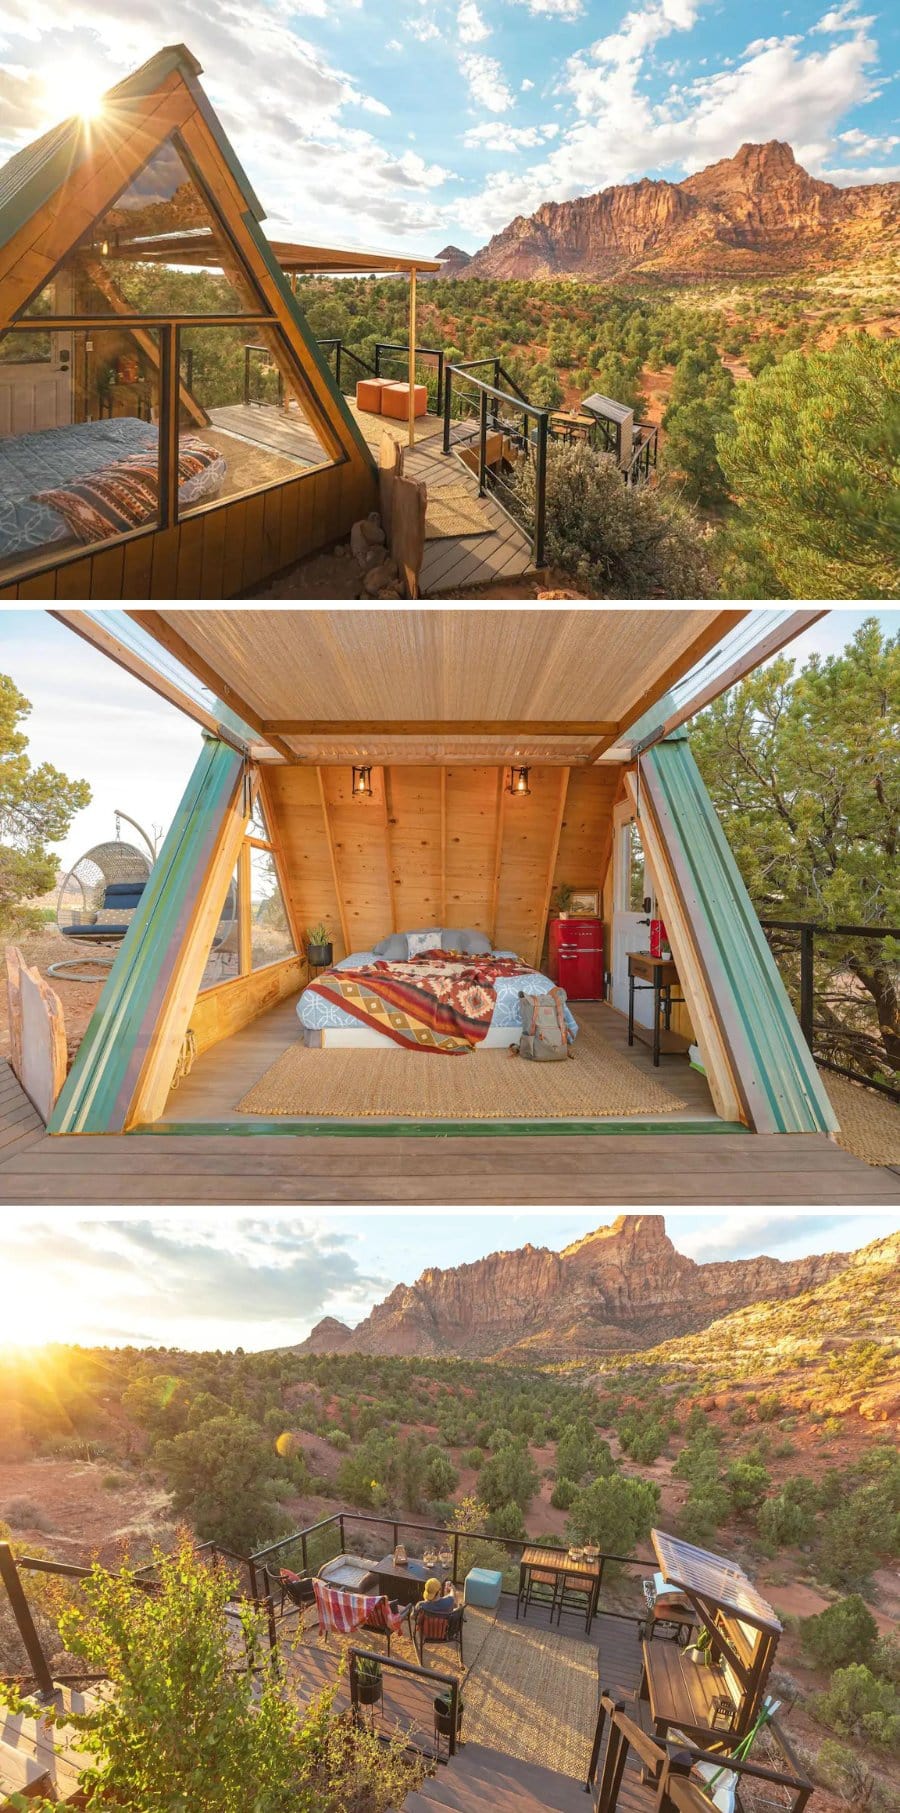 Indoor/outdoor A-frame cabin rental with views of Zion National Park